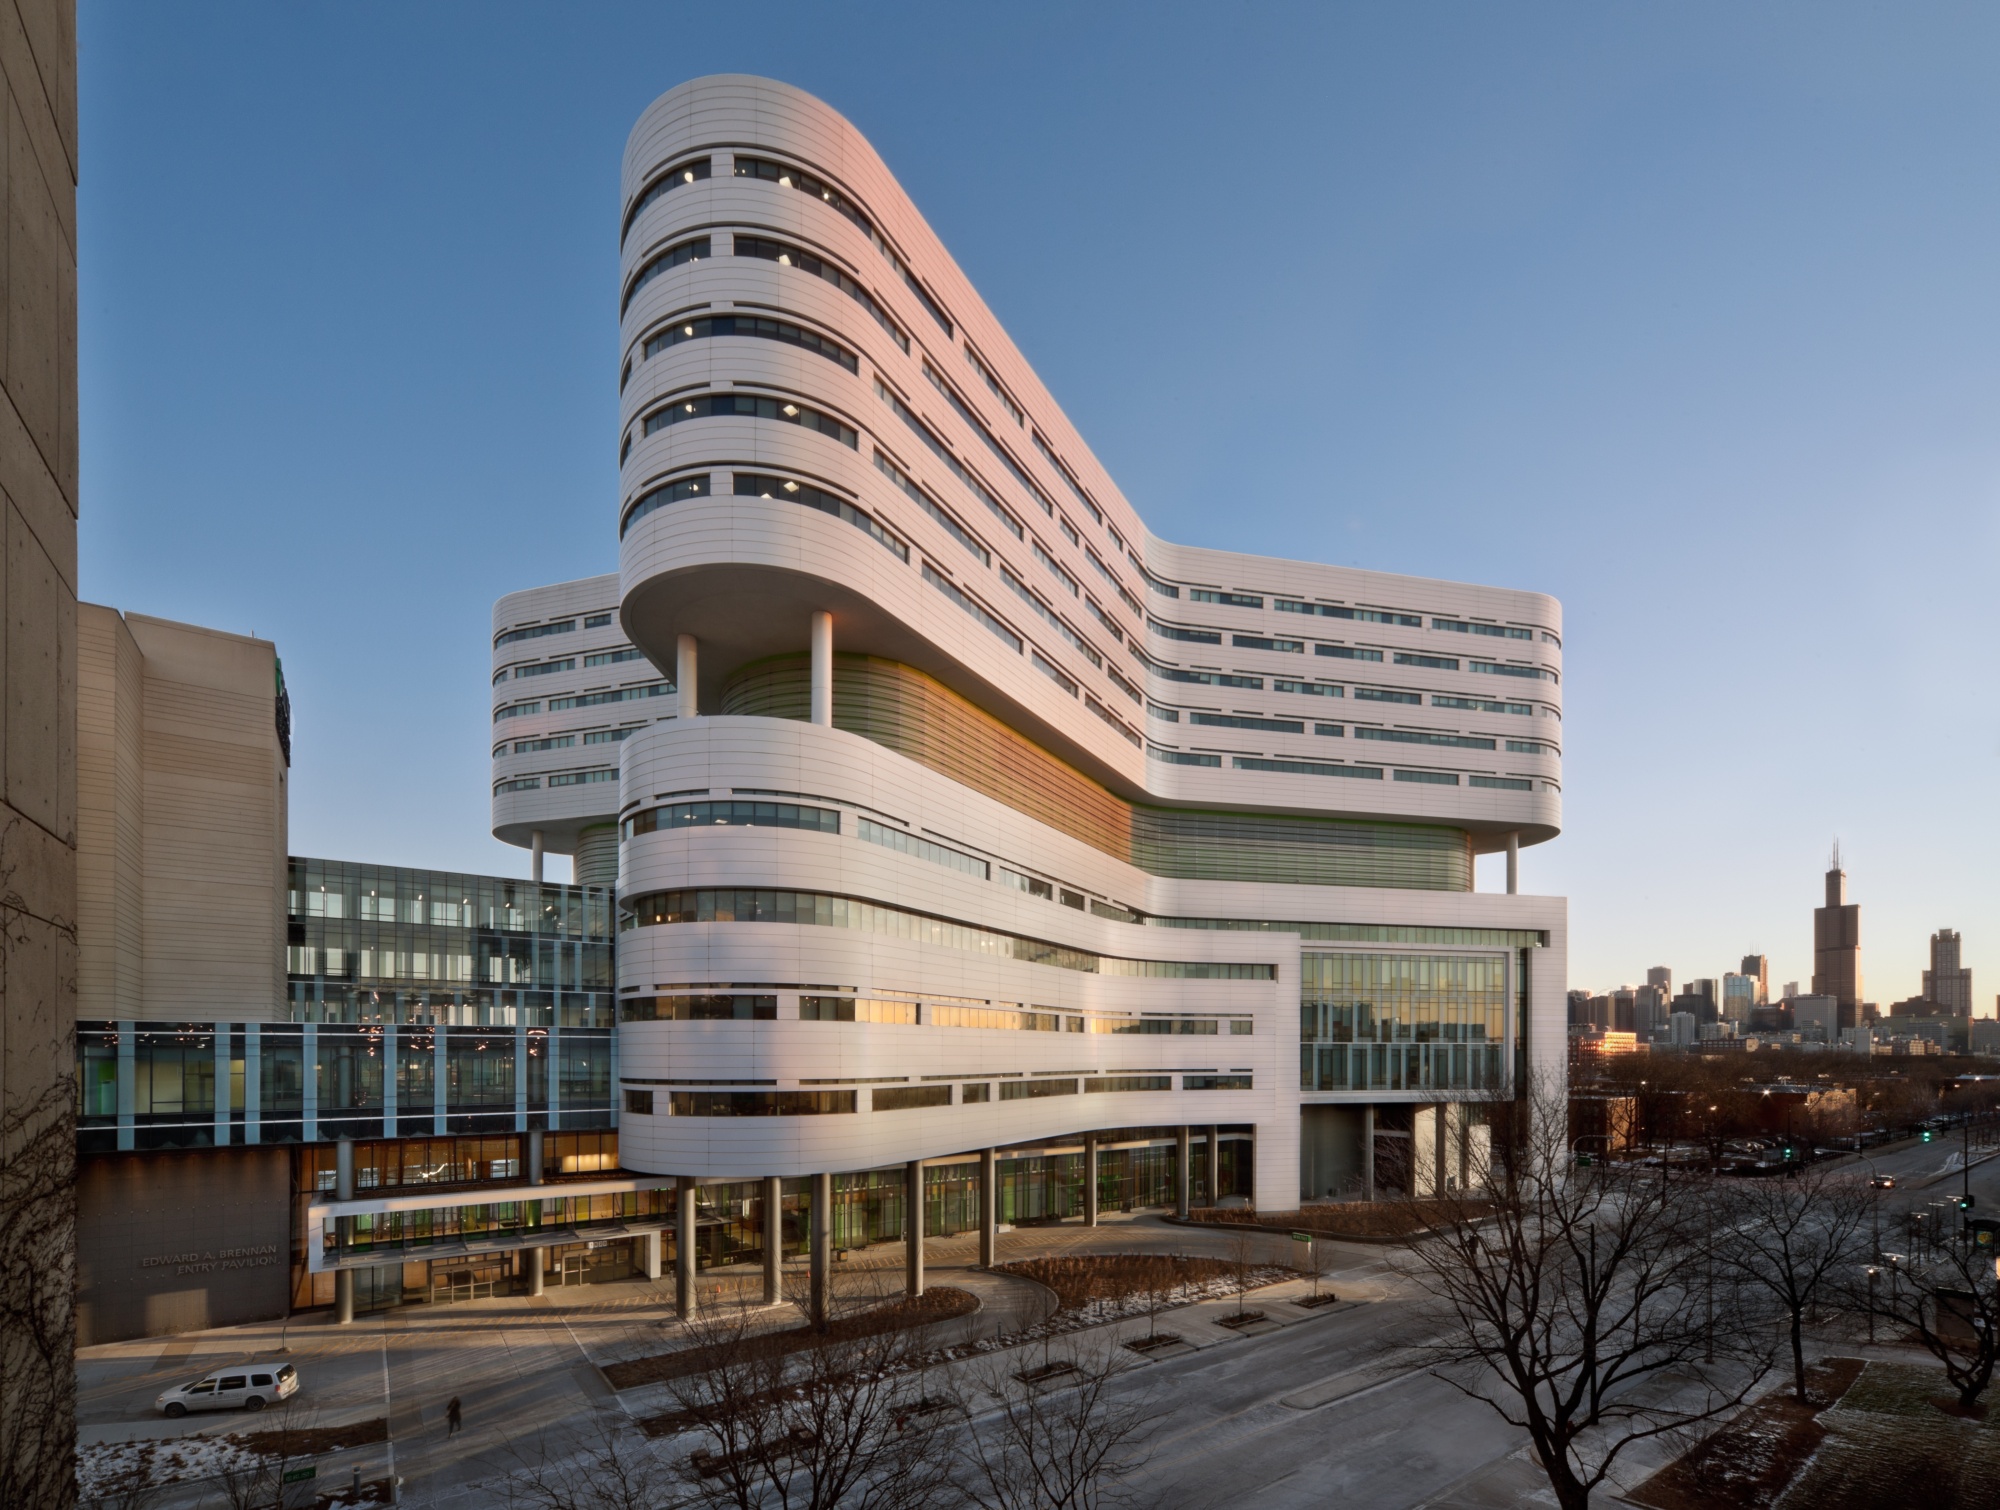 Rush University Medical Center in Chicago, designed by&nbsp;Perkins and&nbsp;Will, was built to anticipate&nbsp;pandemics and other mass casualty events.

&nbsp;